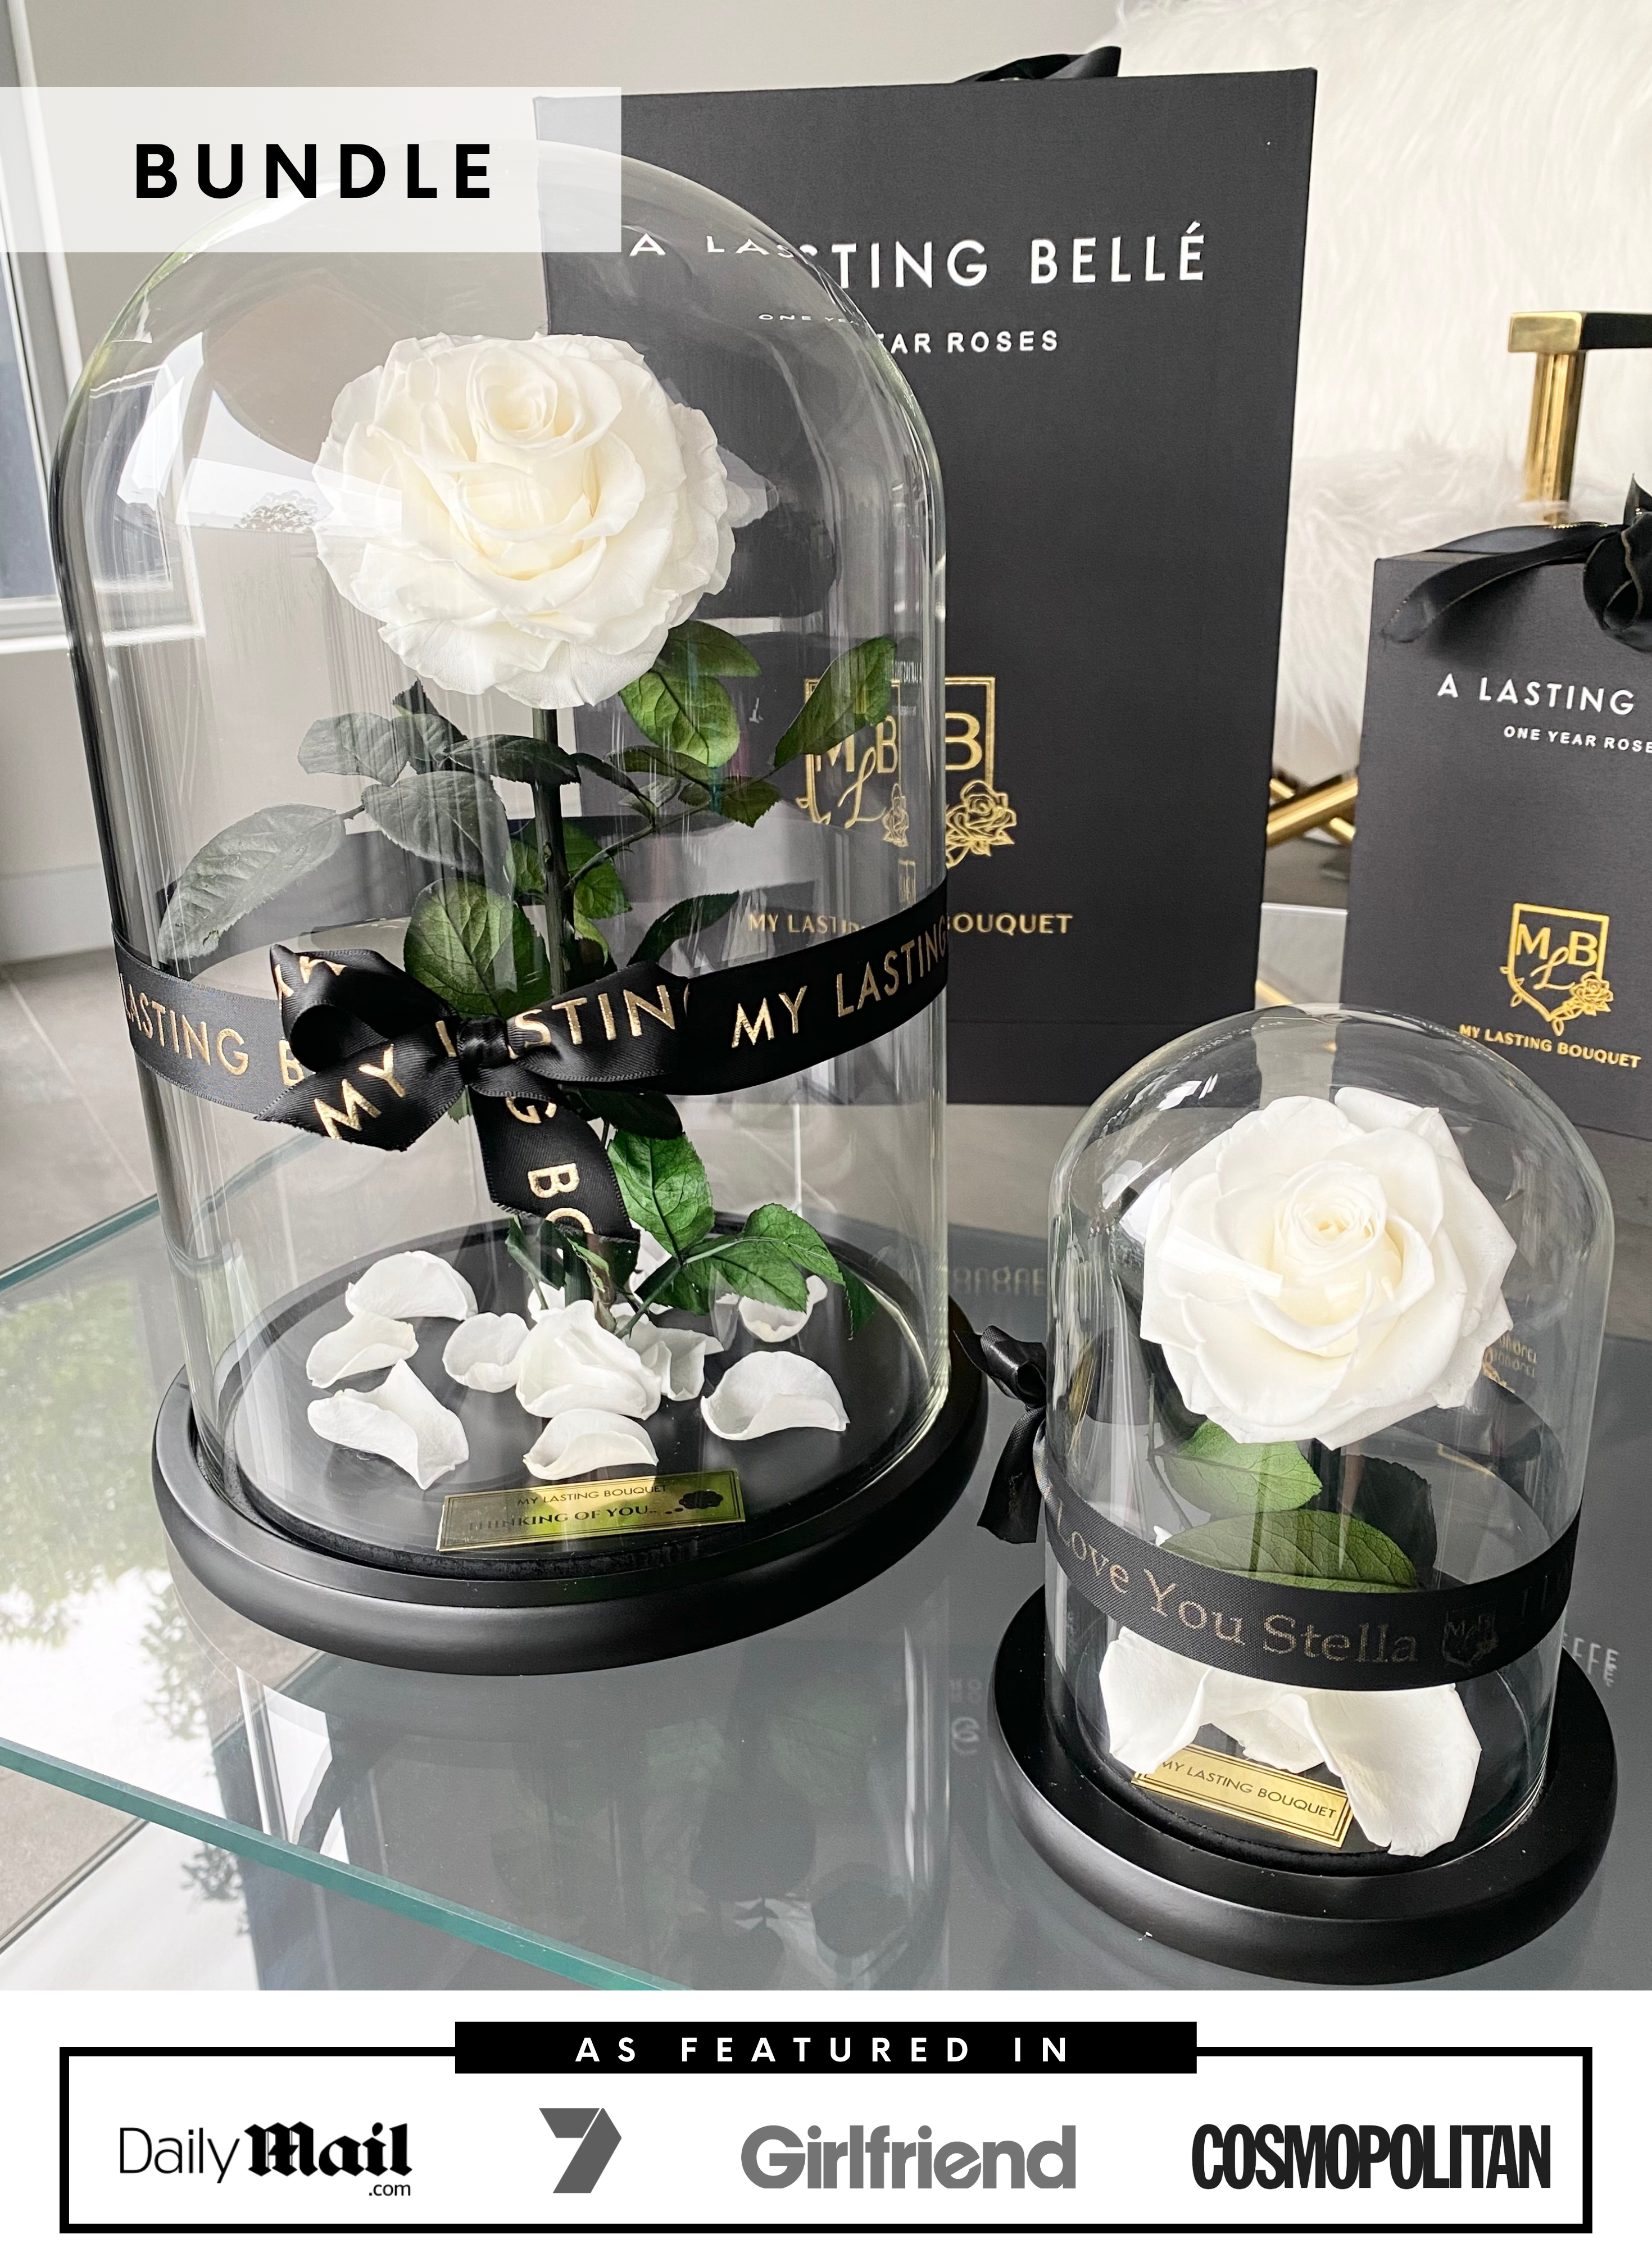 WHITE Rose Dome Set - My Lasting Bouquet